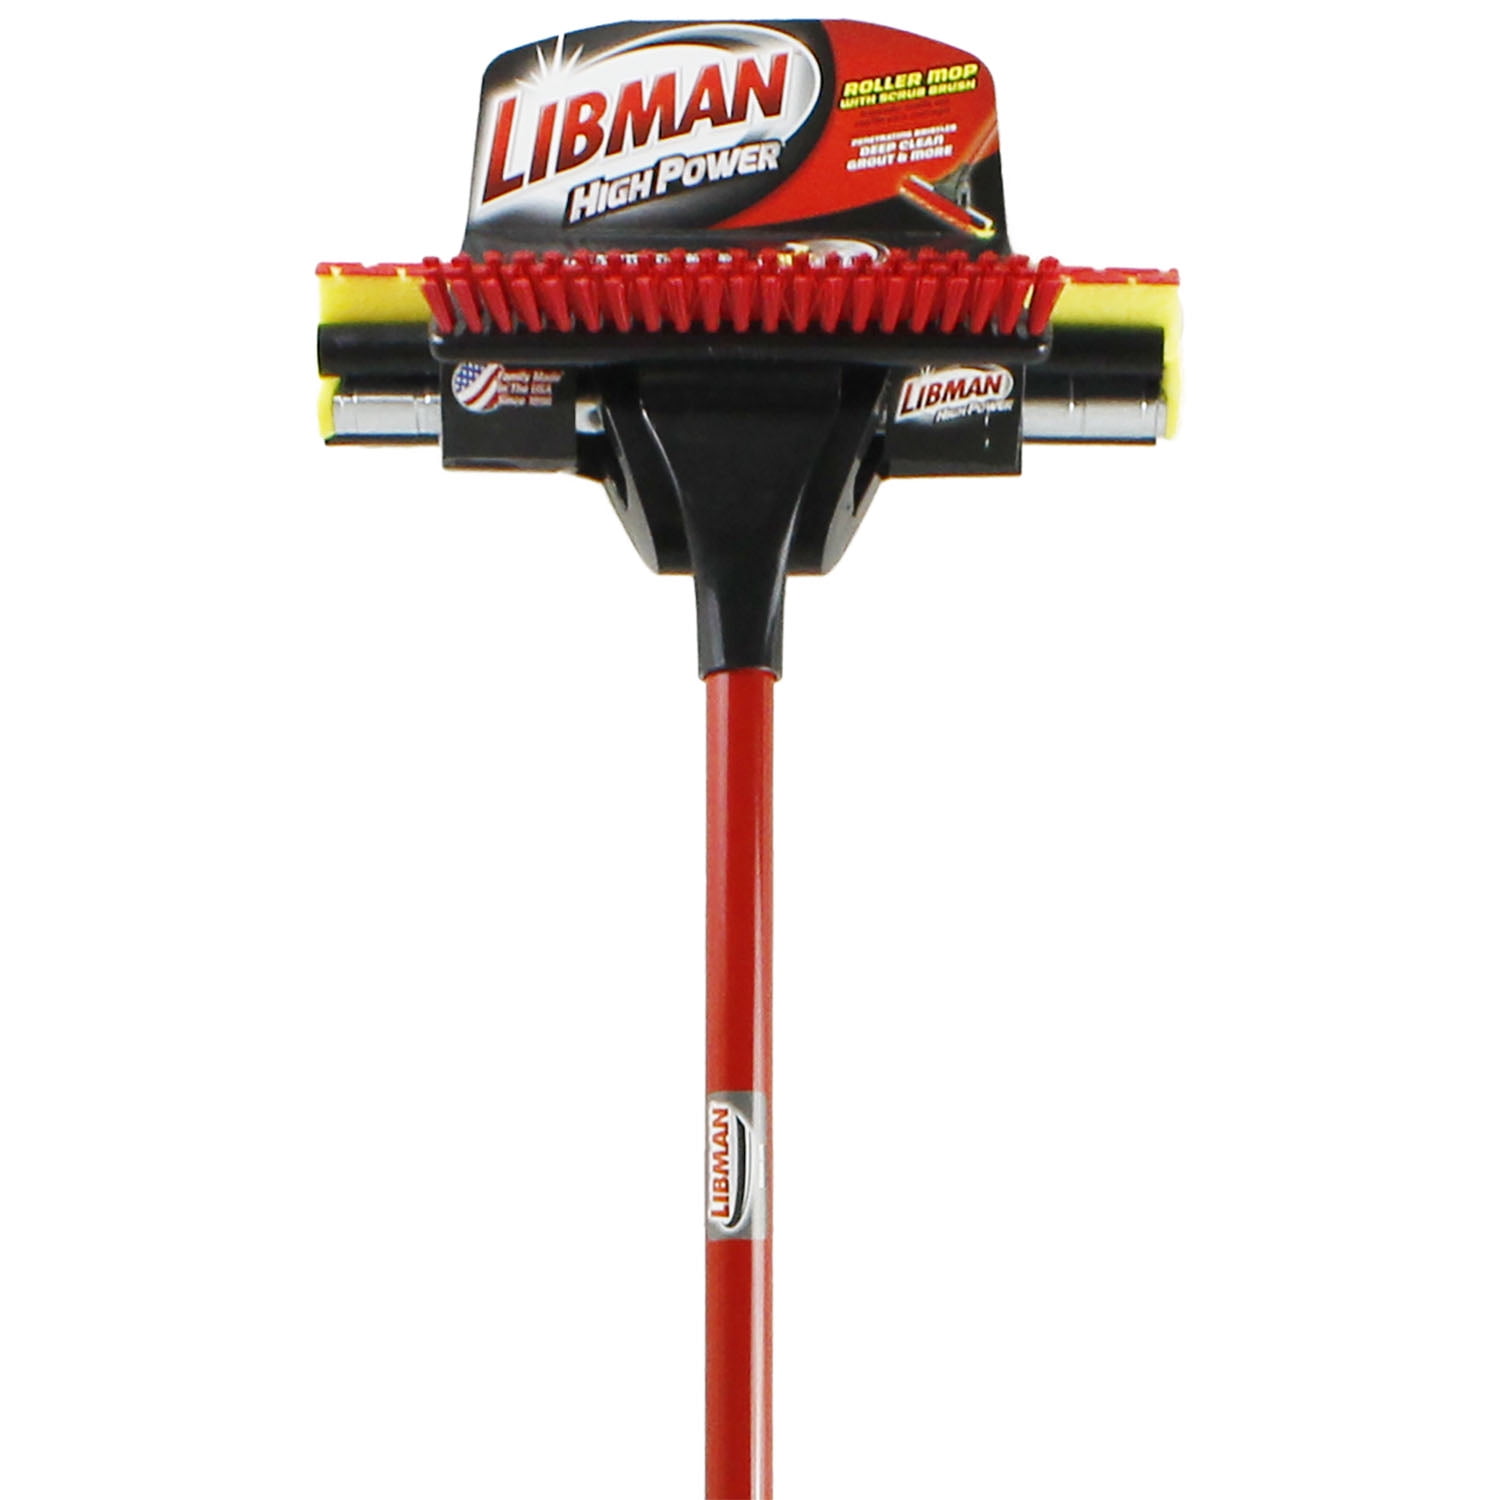 Libman Roller Mop with Scrub Brush Refill 12" Wide sponge 6 pack 